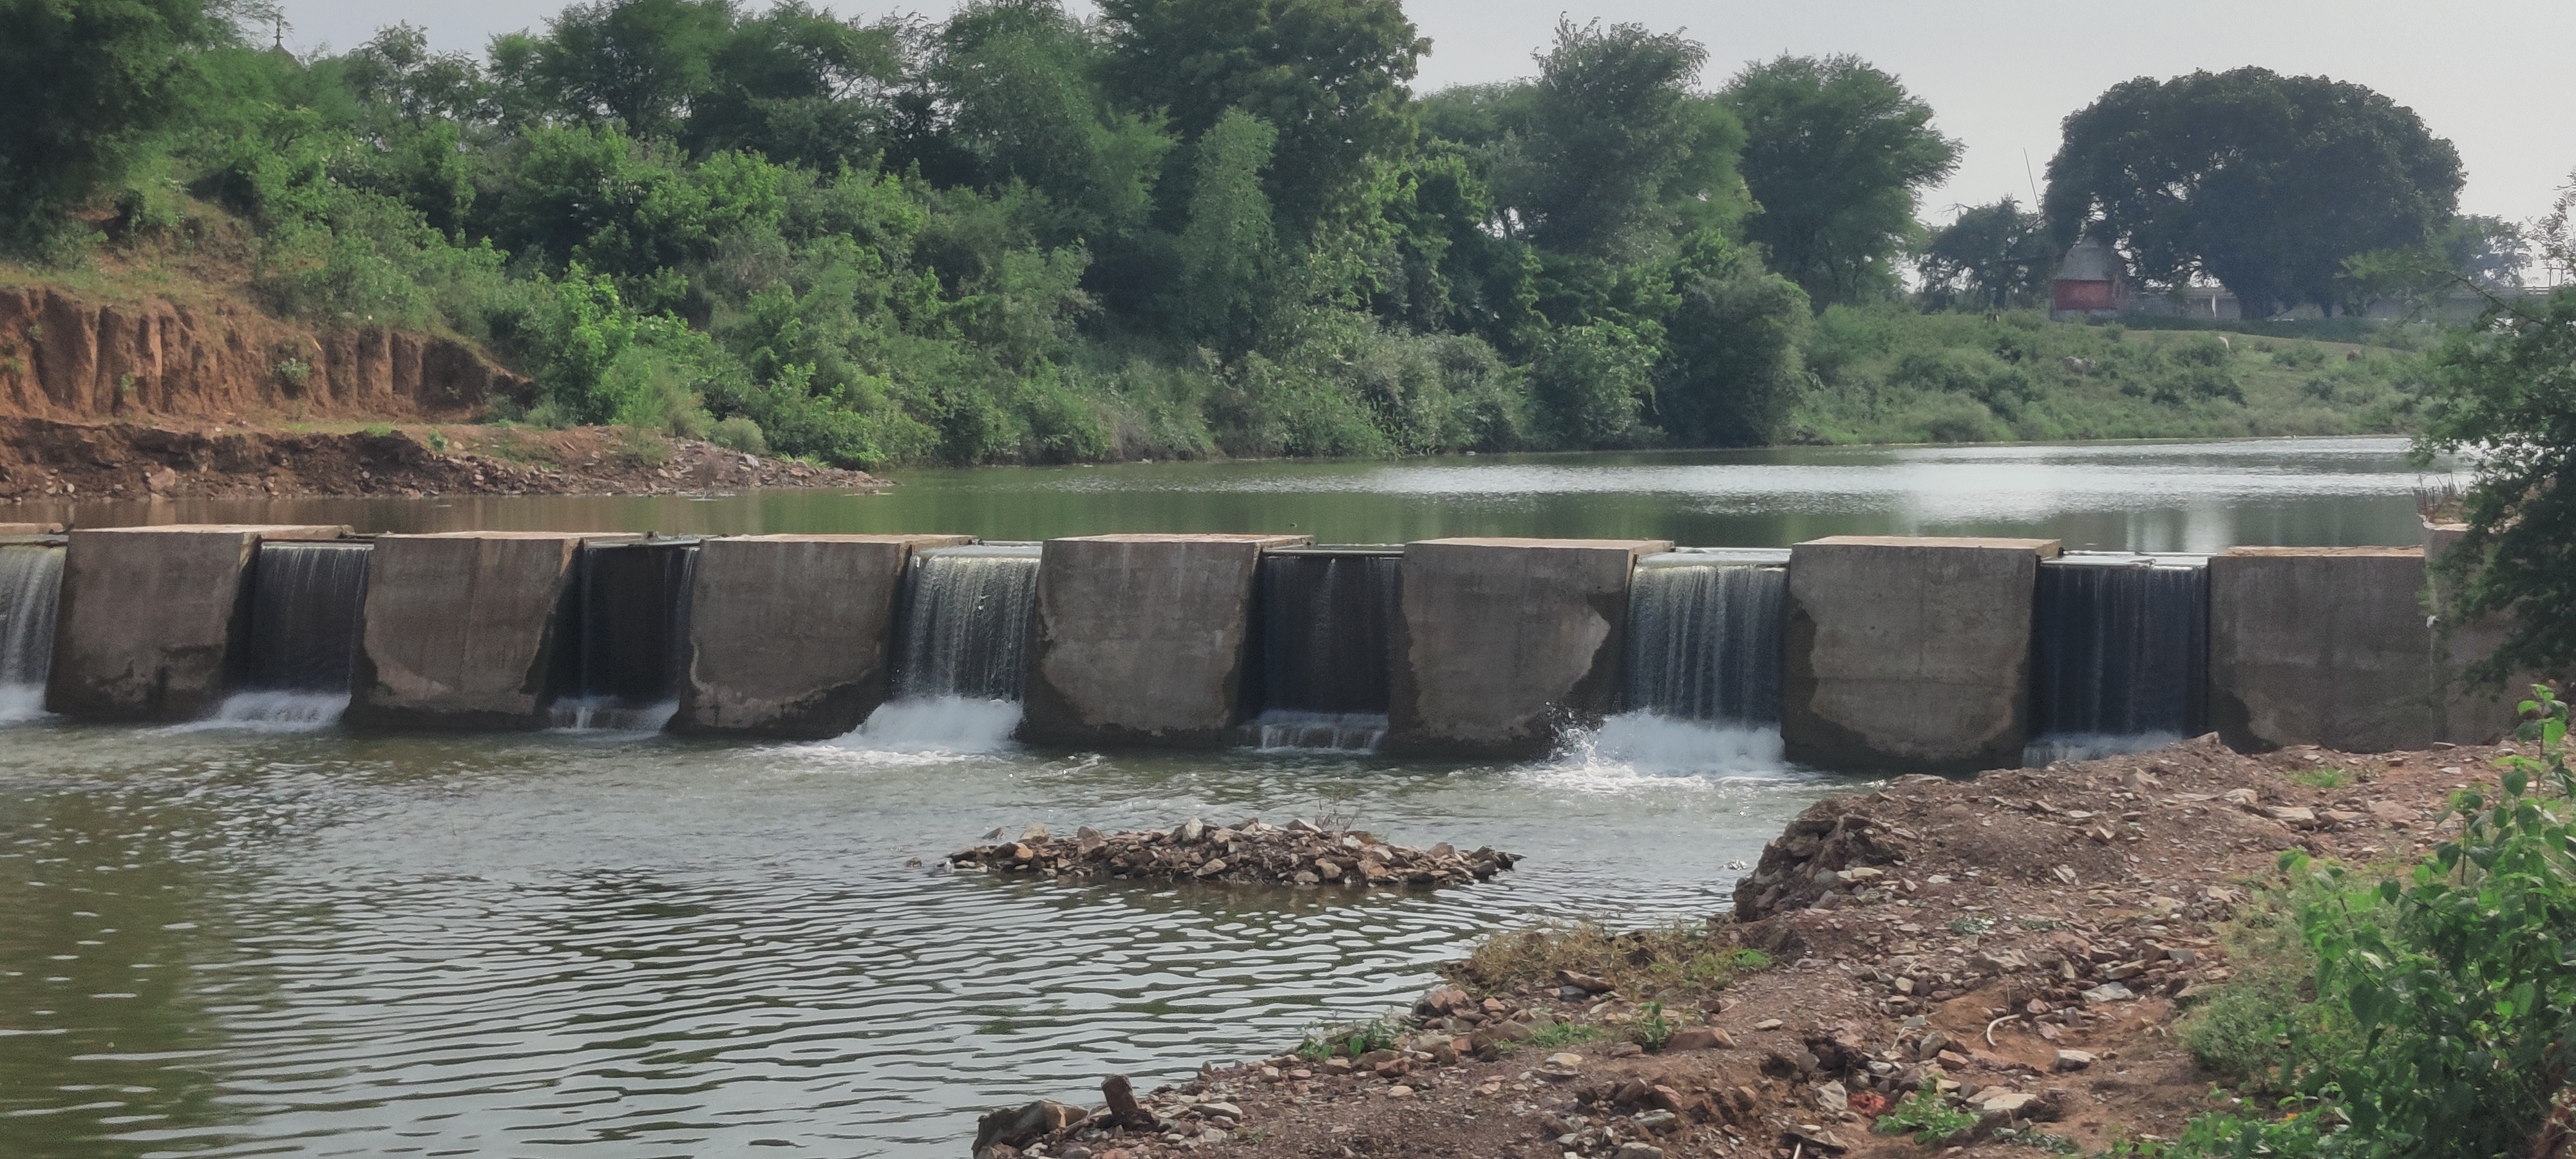 Maihar Cement Works helps build a check dam to benefit 10 villages